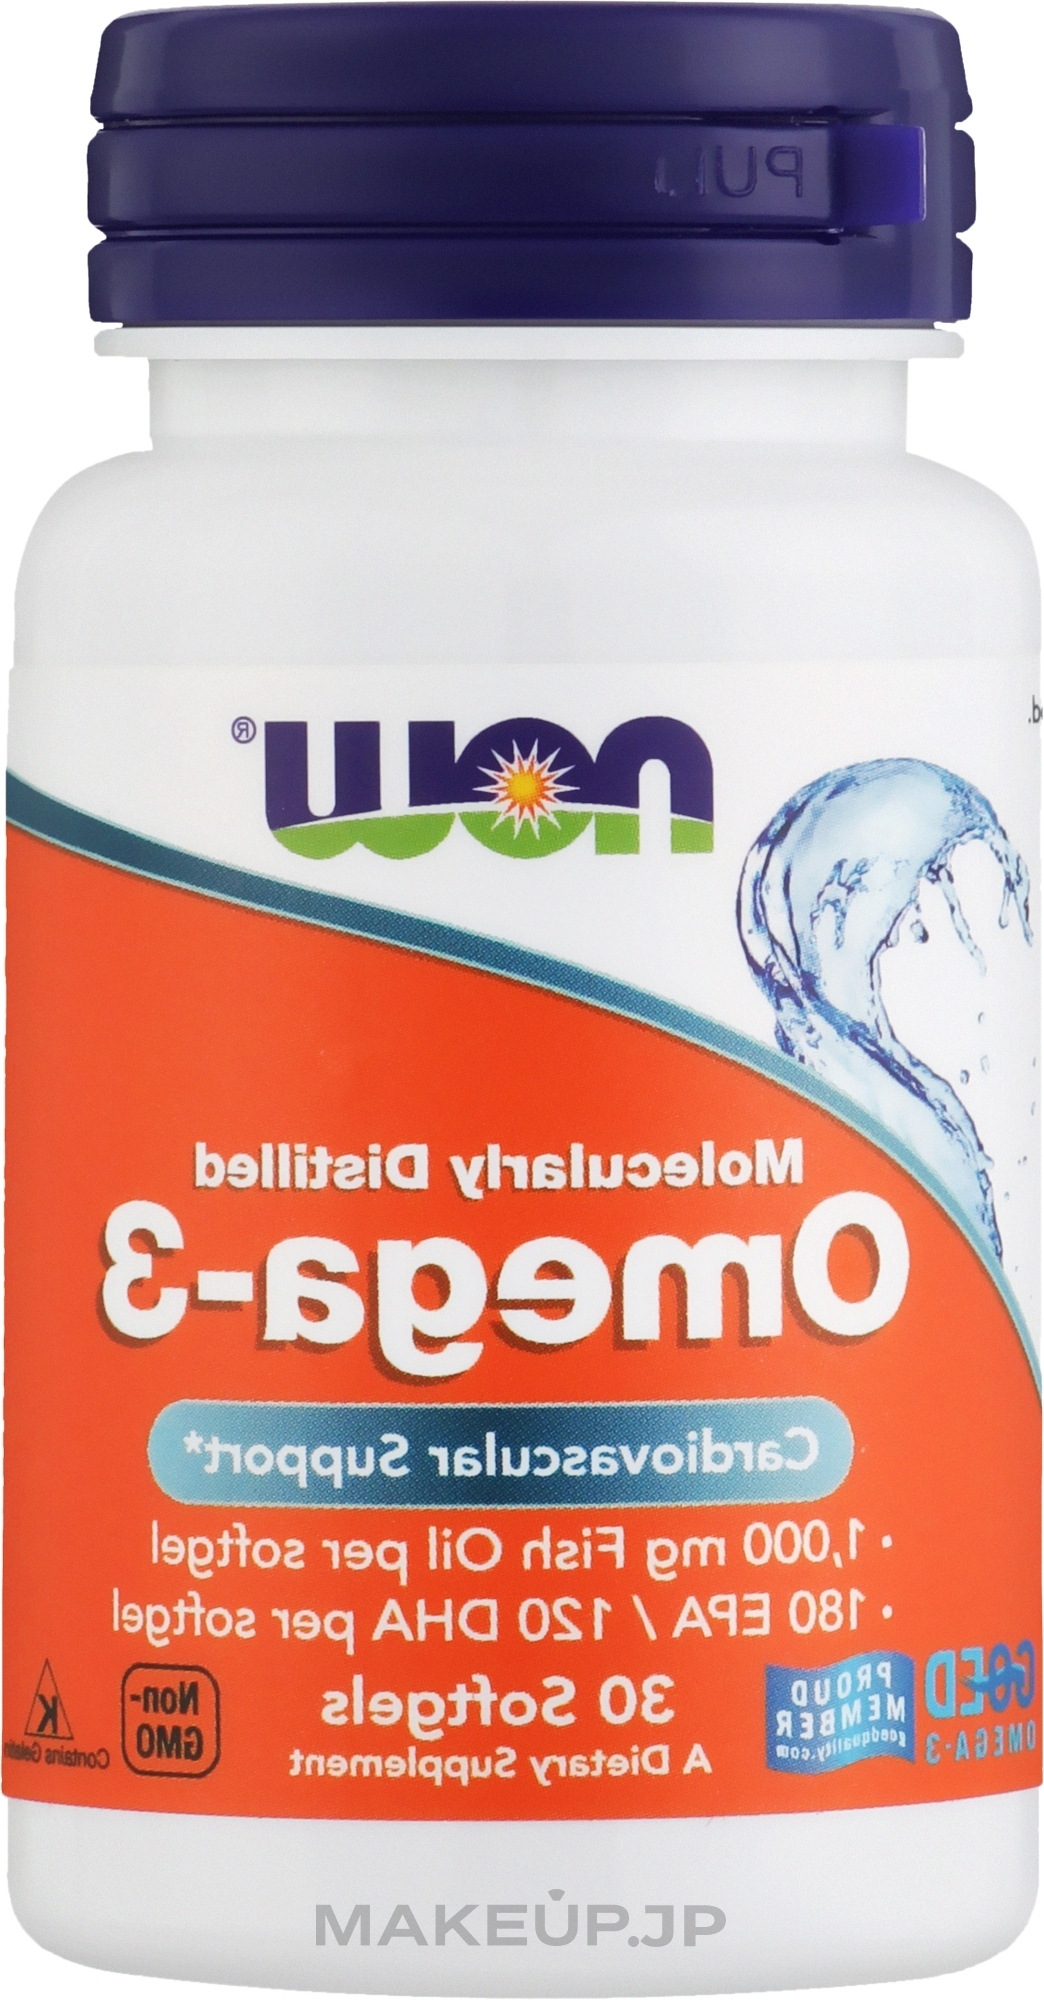 Molecularly Distilled Omega-3 - Now Foods Molecularly Distilled Omega-3 Cardiovascular Support — photo 30 szt.